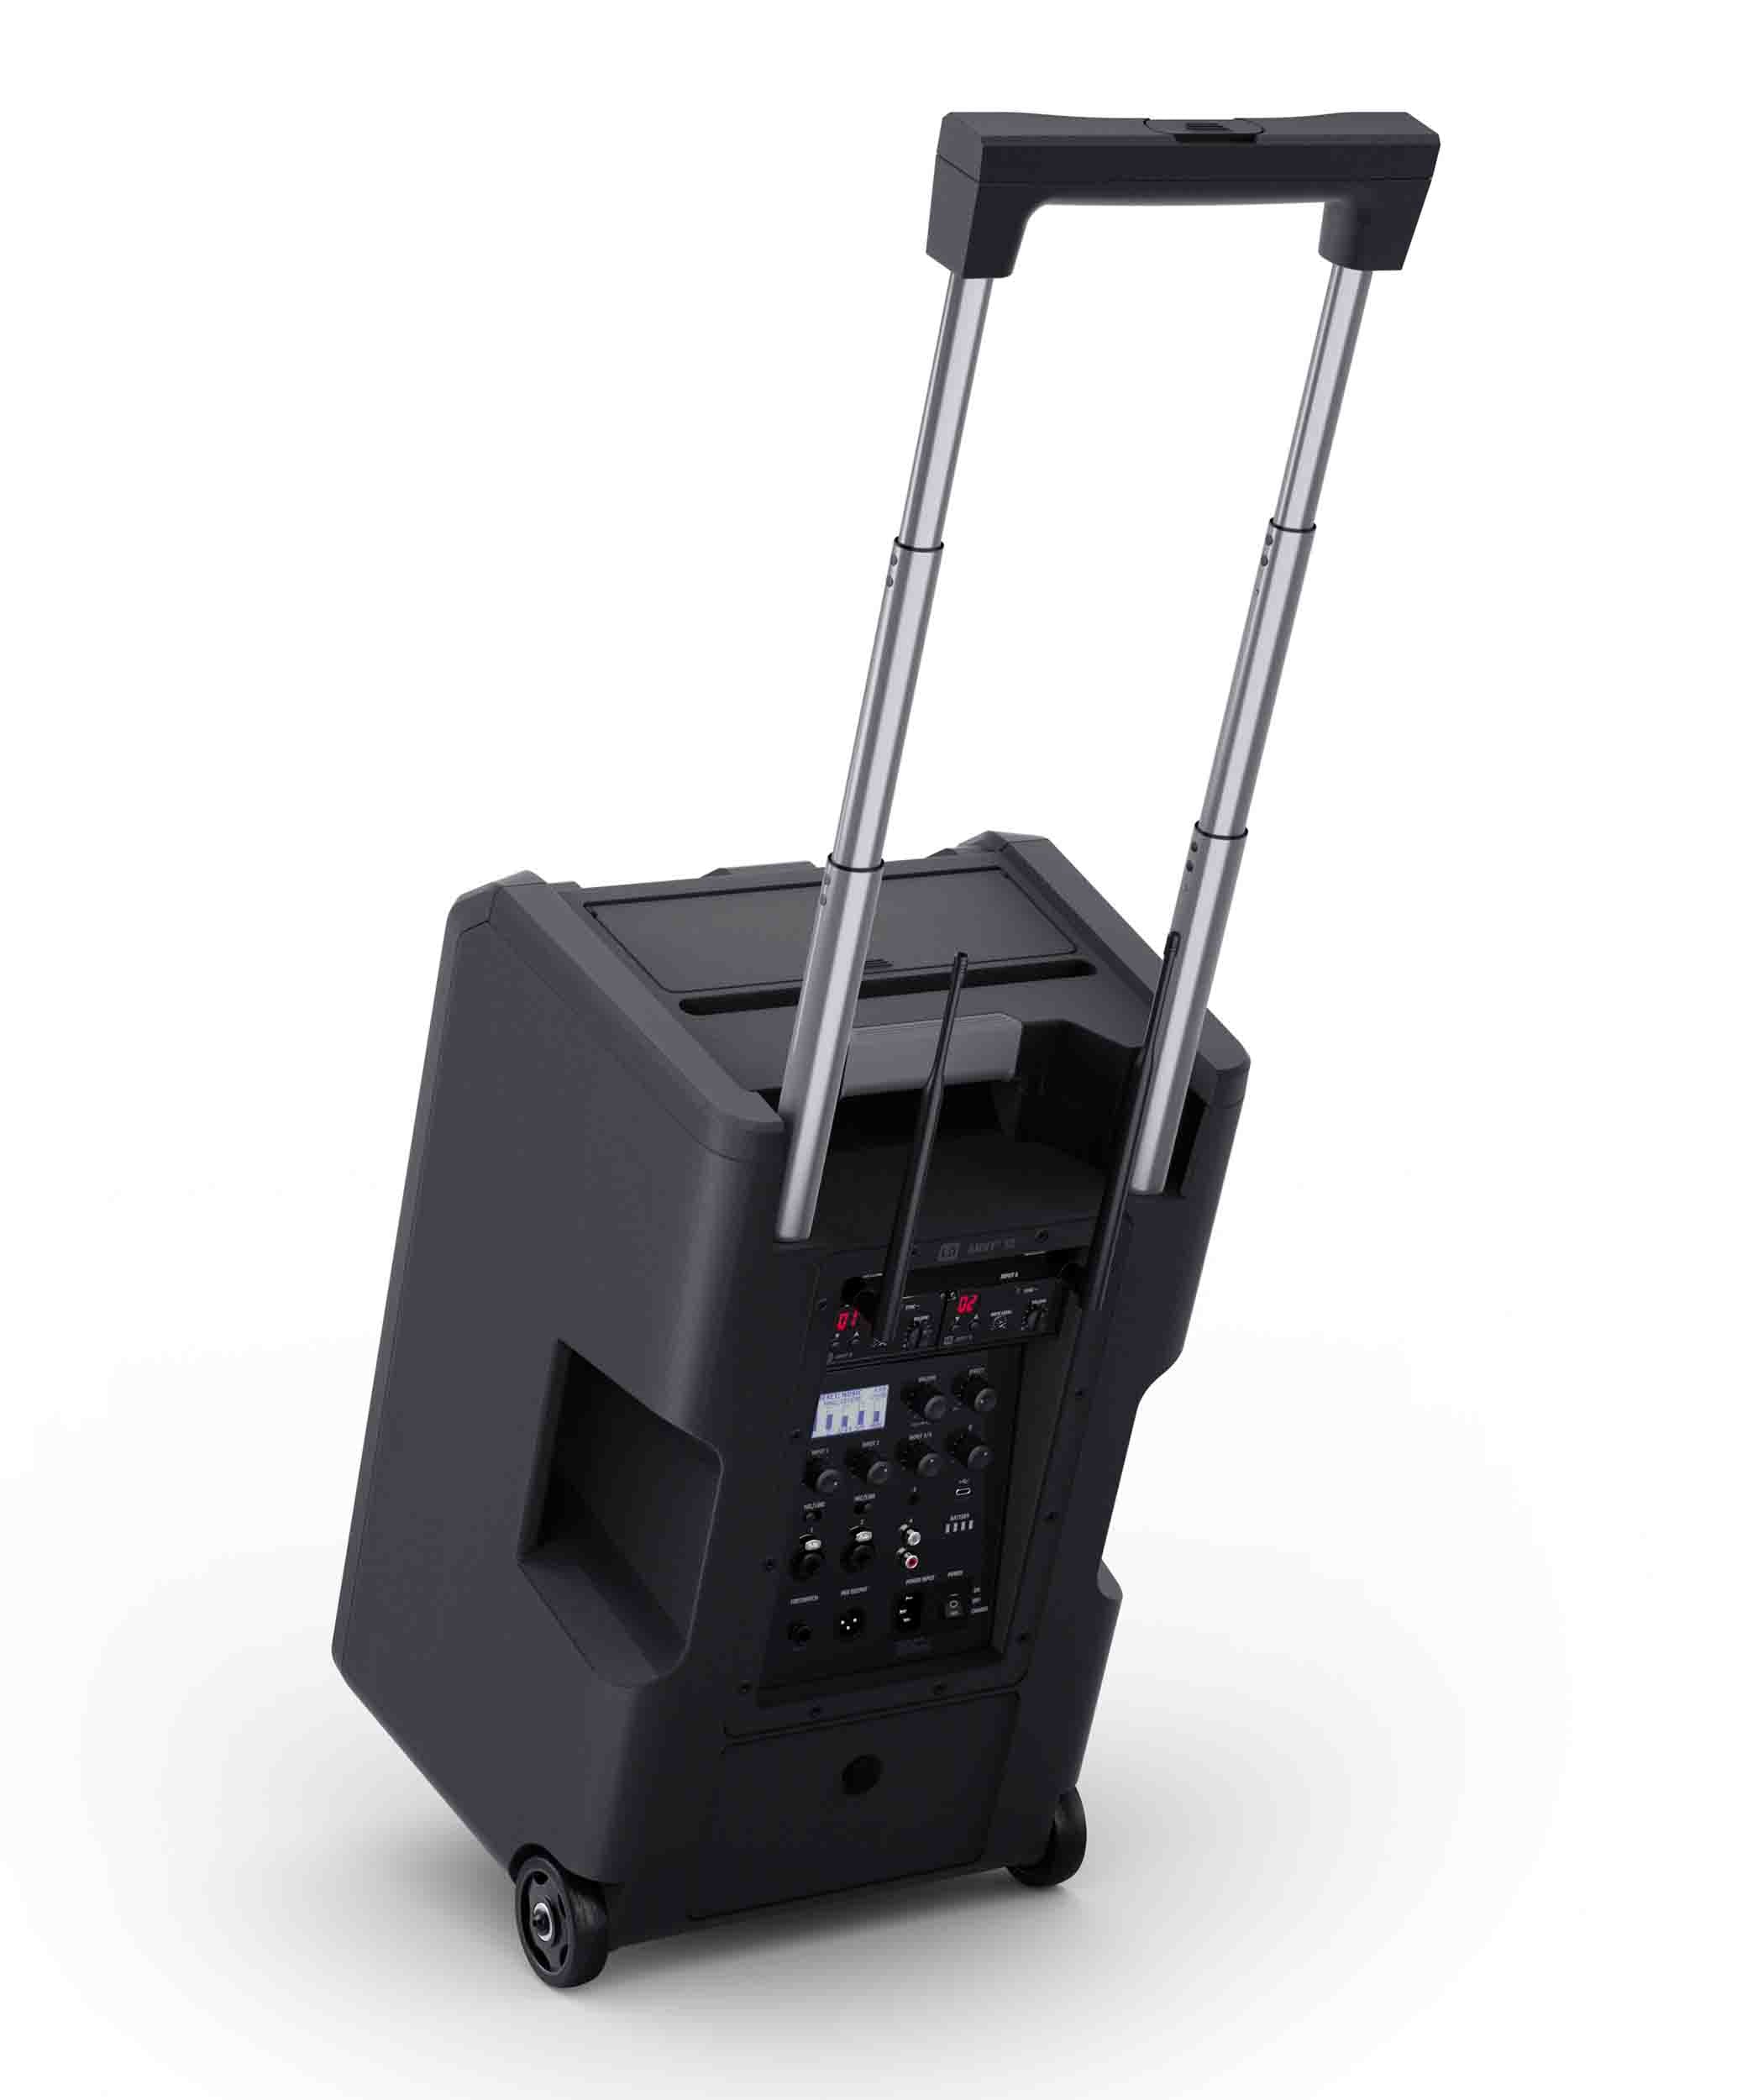 LD System ANNY 10 BPH 2 B4.7, 10" Portable Battery-Powered Bluetooth PA System with Mixer and 2x Headset Microphones Including Bodypacks by LD Systems